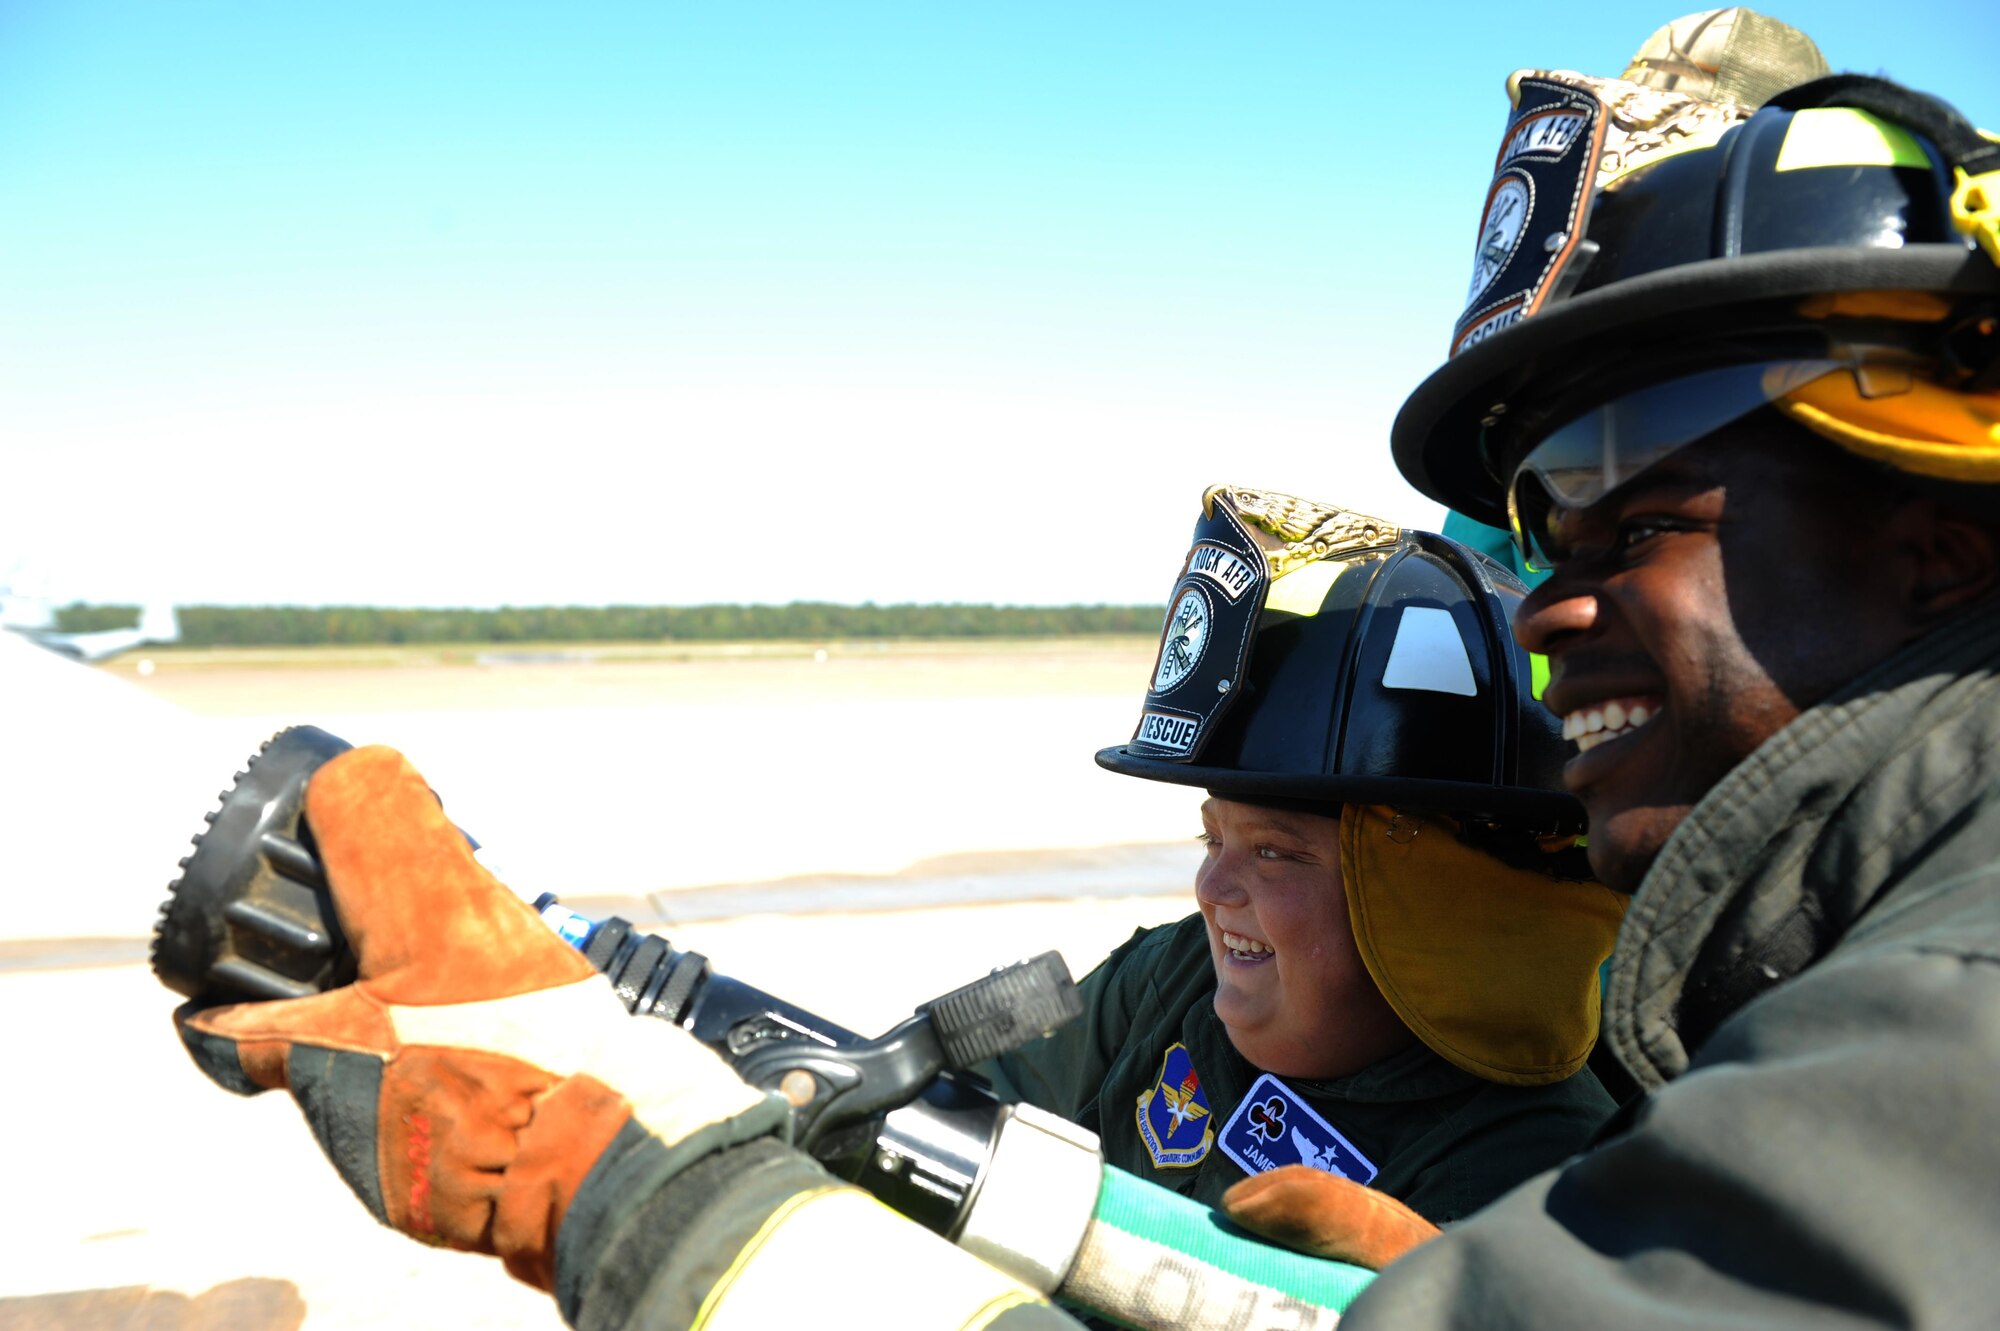 (From right) U.S. Air Force Senior Airman Marcus Scriven, 19th Mission Support Group Fire Department firefighter, helps James Rogers, 17, operate the fire hose during his tour of the fire department Oct. 3, 2016, at Little Rock Air Force Base, Ark. Rogers received the tour as part of the Pilot for a Day program, which provides children who have serious or chronic illnesses an opportunity to be part of a flying squadron for an entire day. 